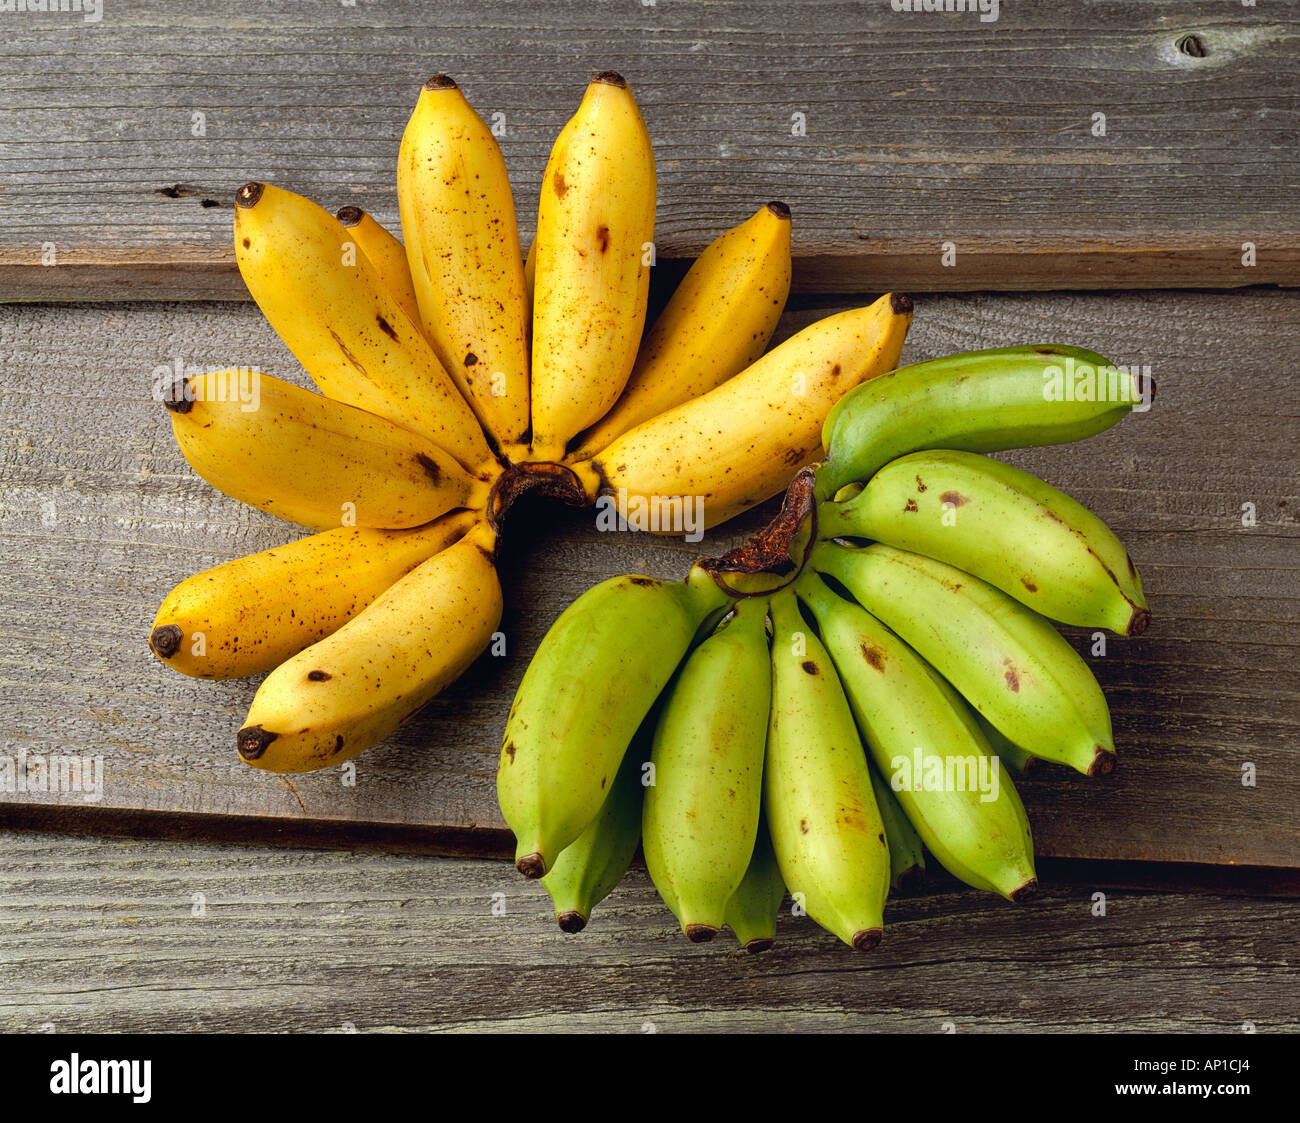 Agriculture - Apple bananas, one bunch ripe and one bunch green, on a barnwood surface, in studio. Stock Photo